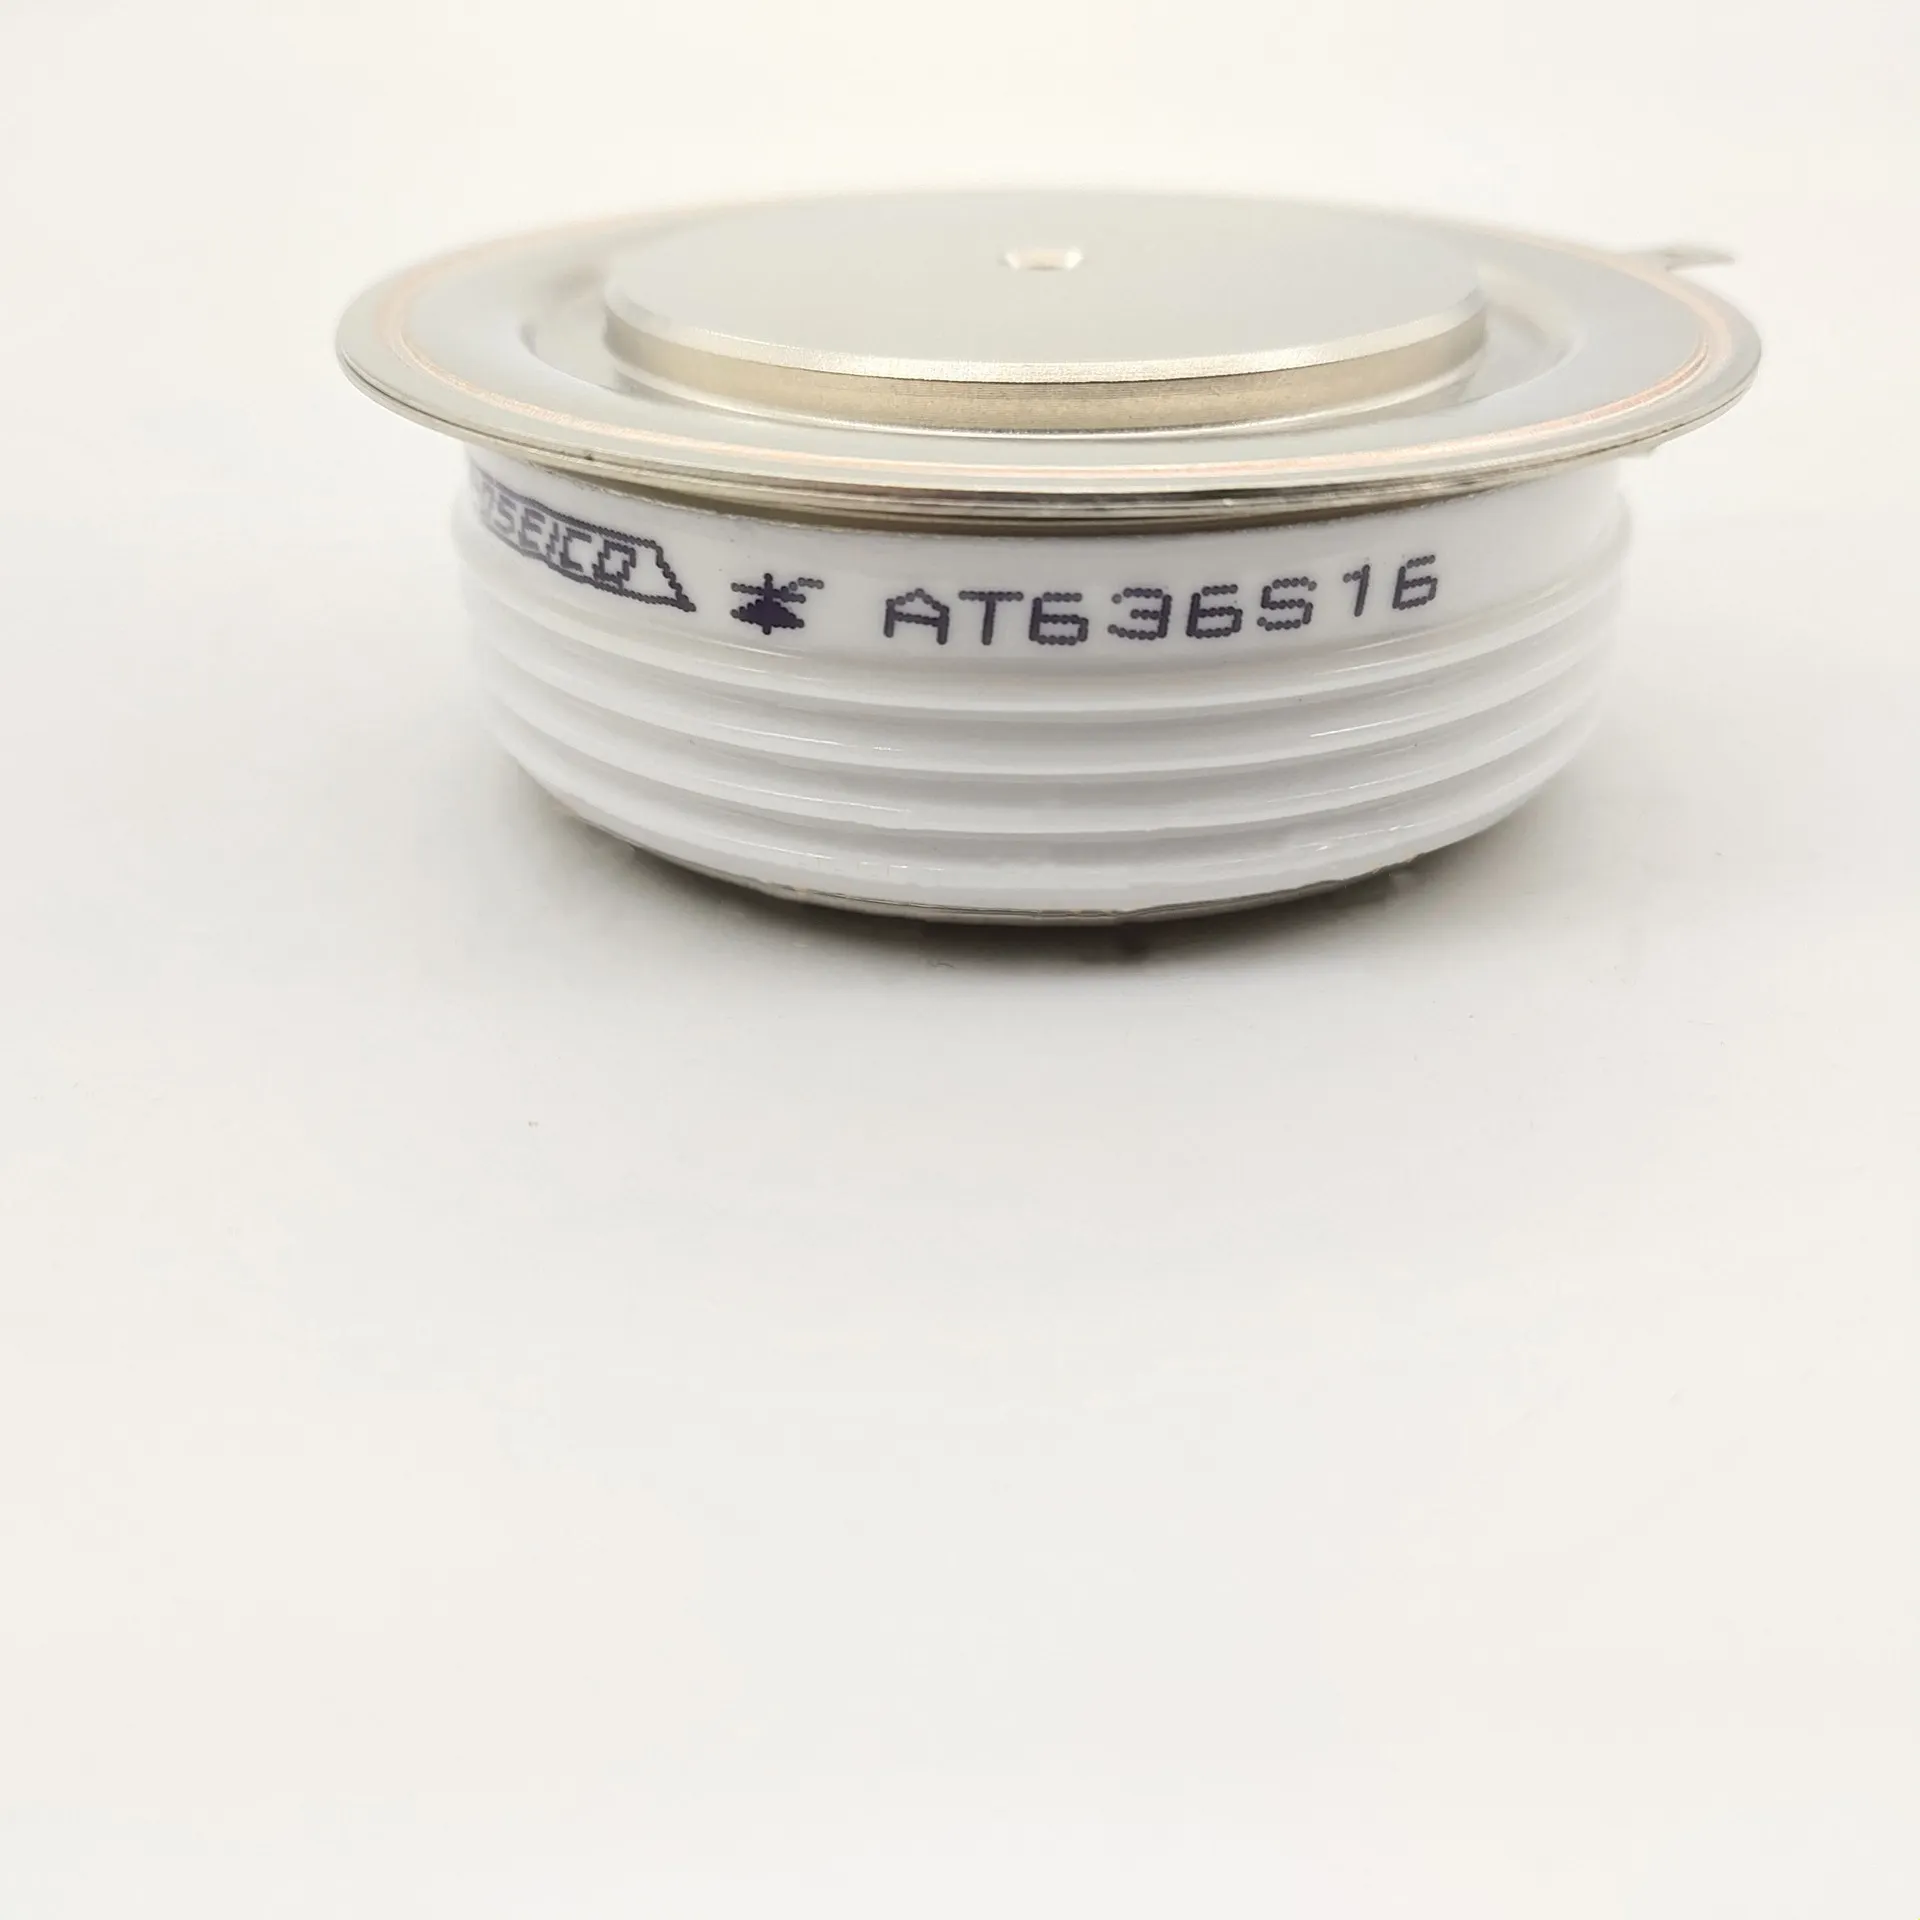 New Original stock Thyristor T123-500-08 T123-250-16 T123-200-16 in stock (fast delivery low price best quantity)